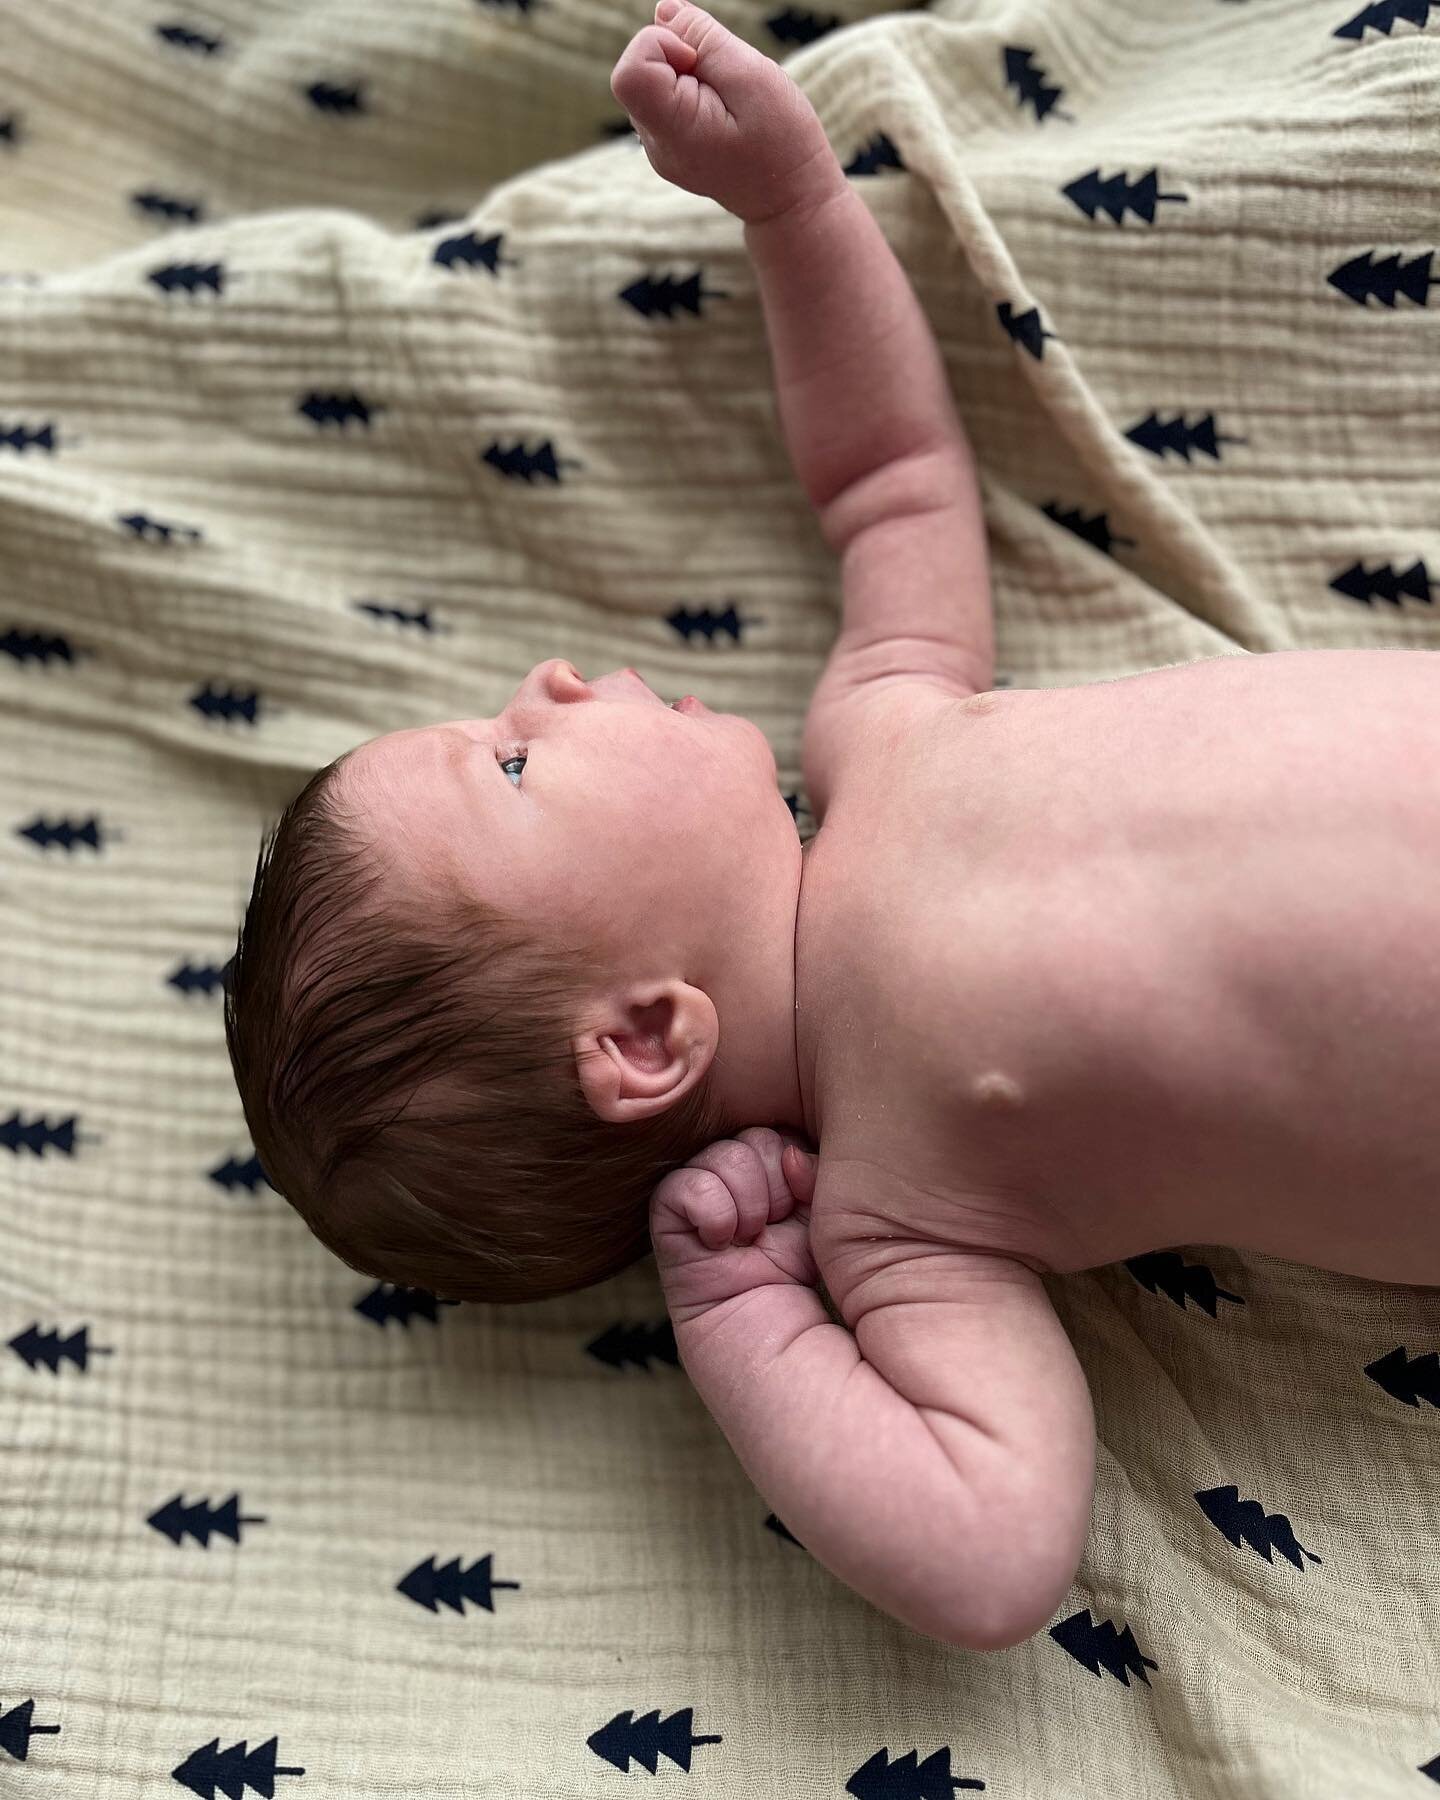 Celebrating another St. Joe&rsquo;s Baby! Say hello to handsome Rowan Everett Wood, a healthy 9lb 6 oz at birth. Time flies and he is now over a month old! 

#babyboy #chunkymonkey🐒 #goodjobmomanddad